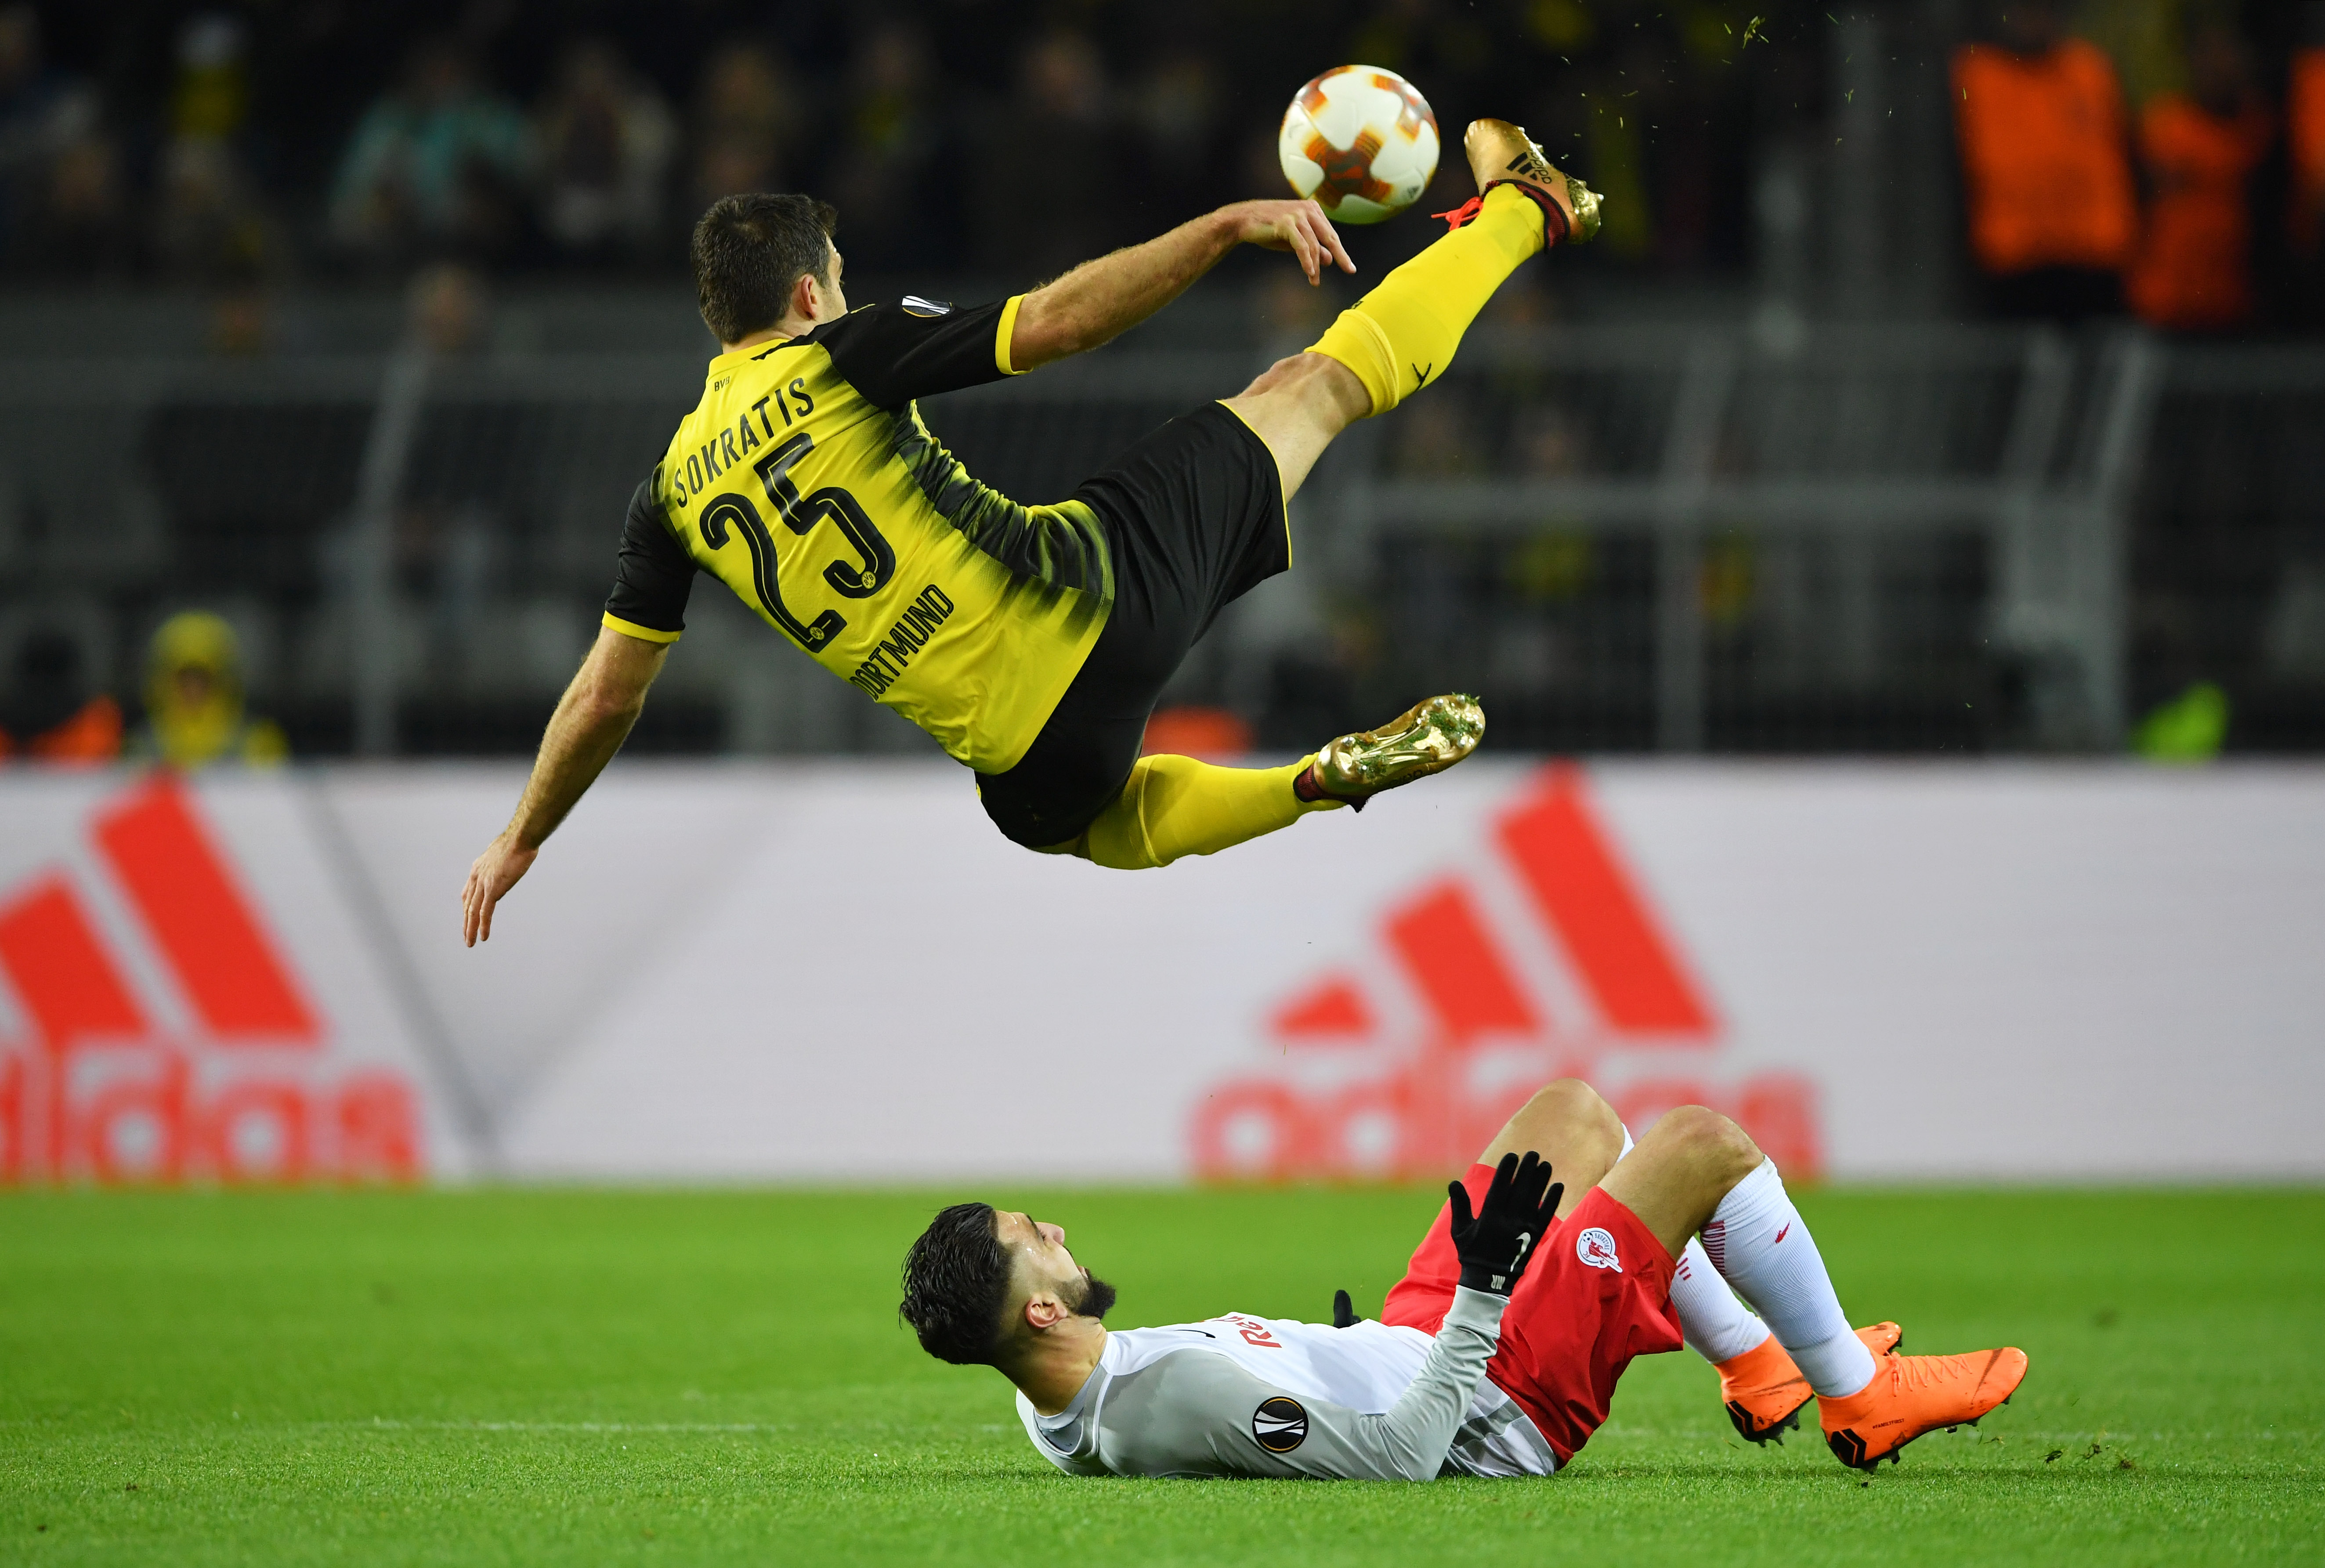 DORTMUND, GERMANY - MARCH 08:  Sokratis Papastathopoulos of Borussia Dortmund clears from Munas Dabbur of Red Bull Salzburg during the UEFA Europa League Round of 16 match between Borussia Dortmund and FC Red Bull Salzburg at the Signal Iduna Park on March 8, 2018 in Dortmund, Germany.  (Photo by Stuart Franklin/Bongarts/Getty Images)